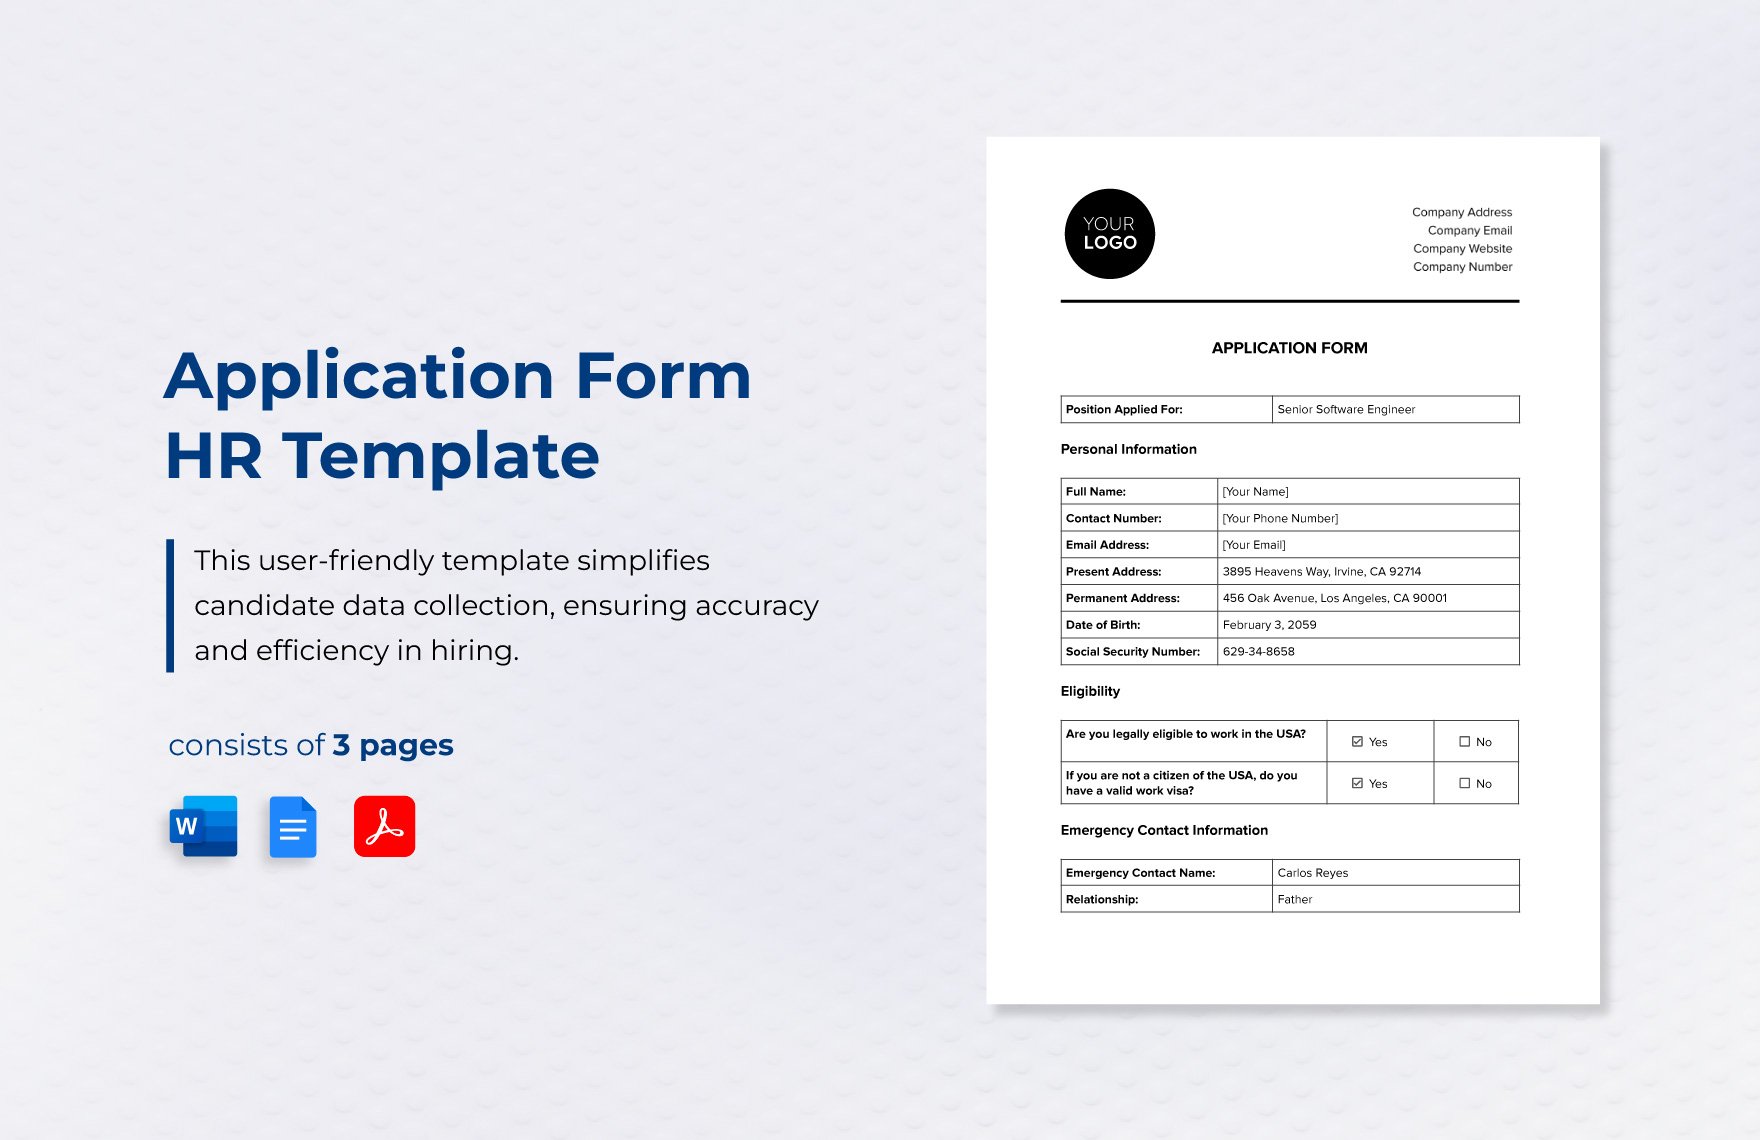 Application Form HR Template